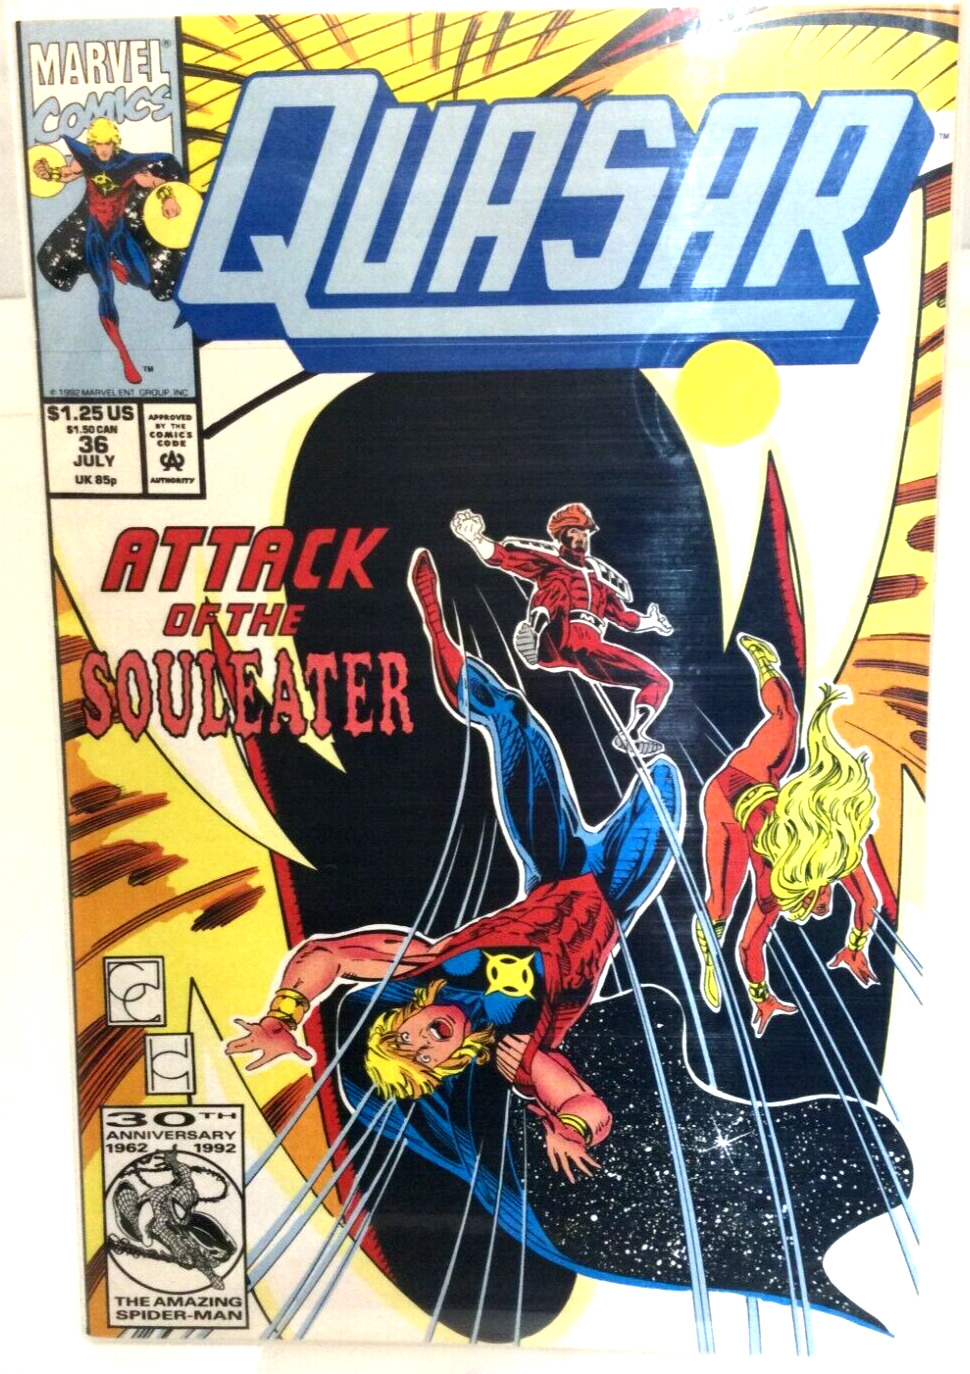 Marvel Comics Quasar Attack of the Souleater Soul Cage vol. 1 no. 36 July 1992  